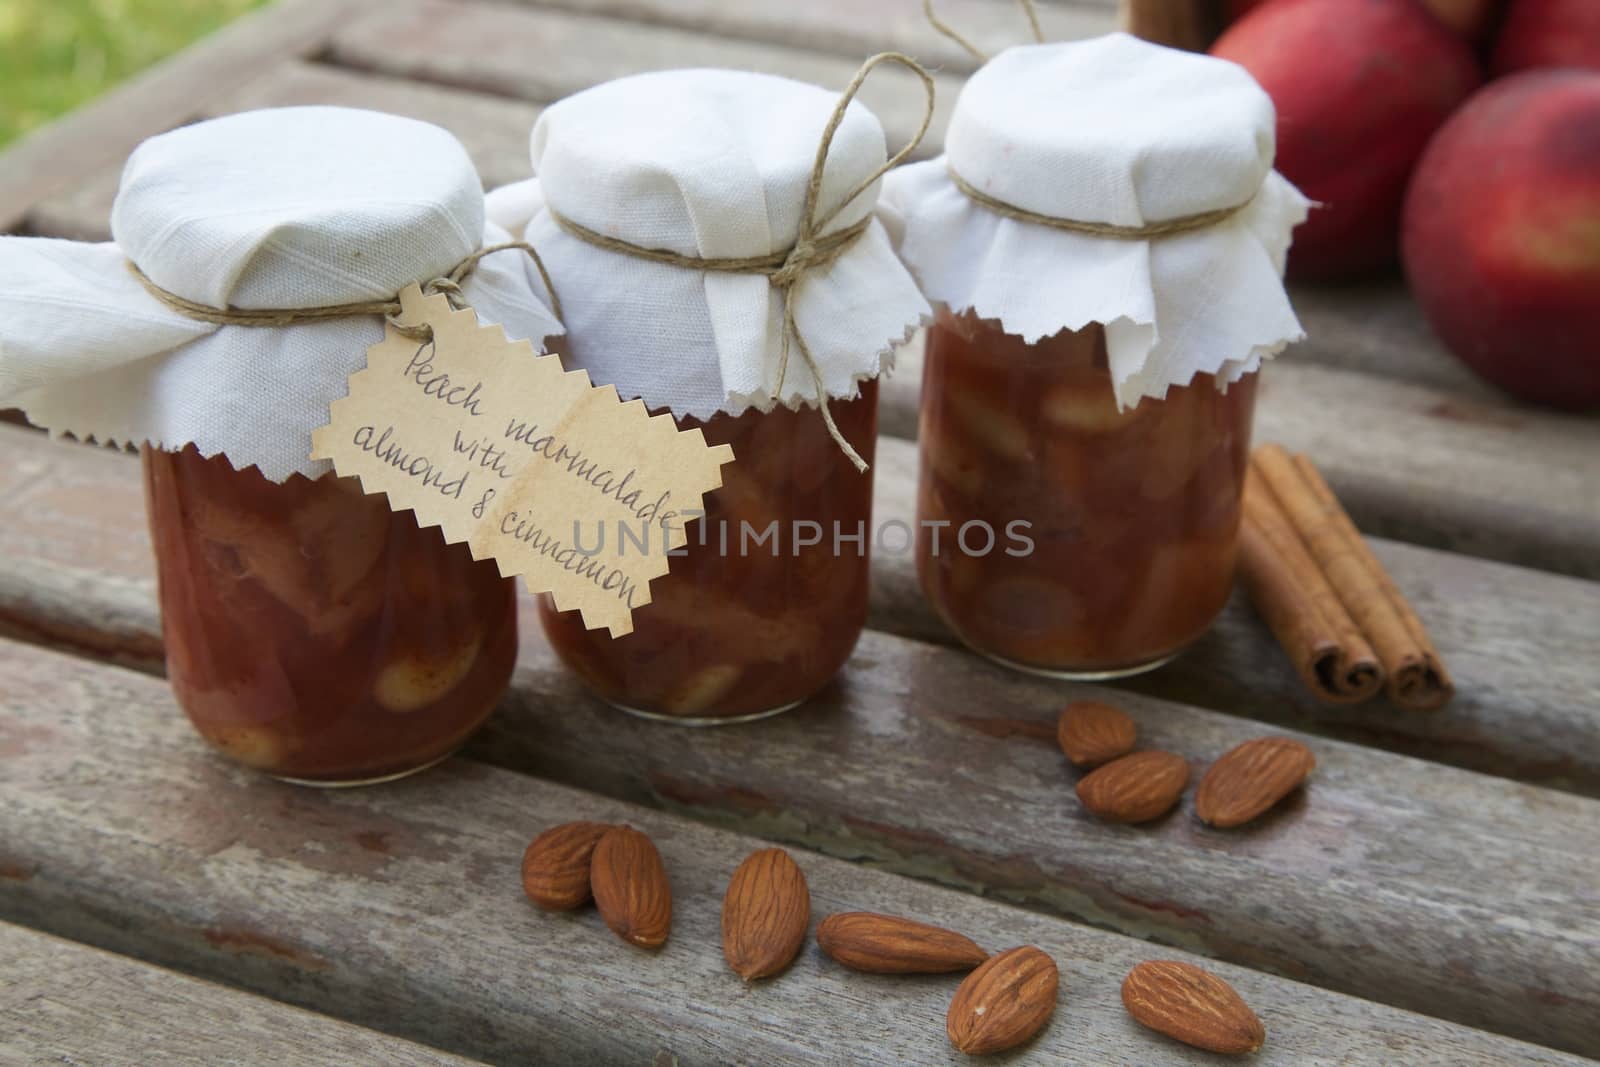 Glasses of homemade peach marmalade with almond nuts and cinnamon on an old wooden surface.Almonds,cinnamon sticks and fresh peaches in the background